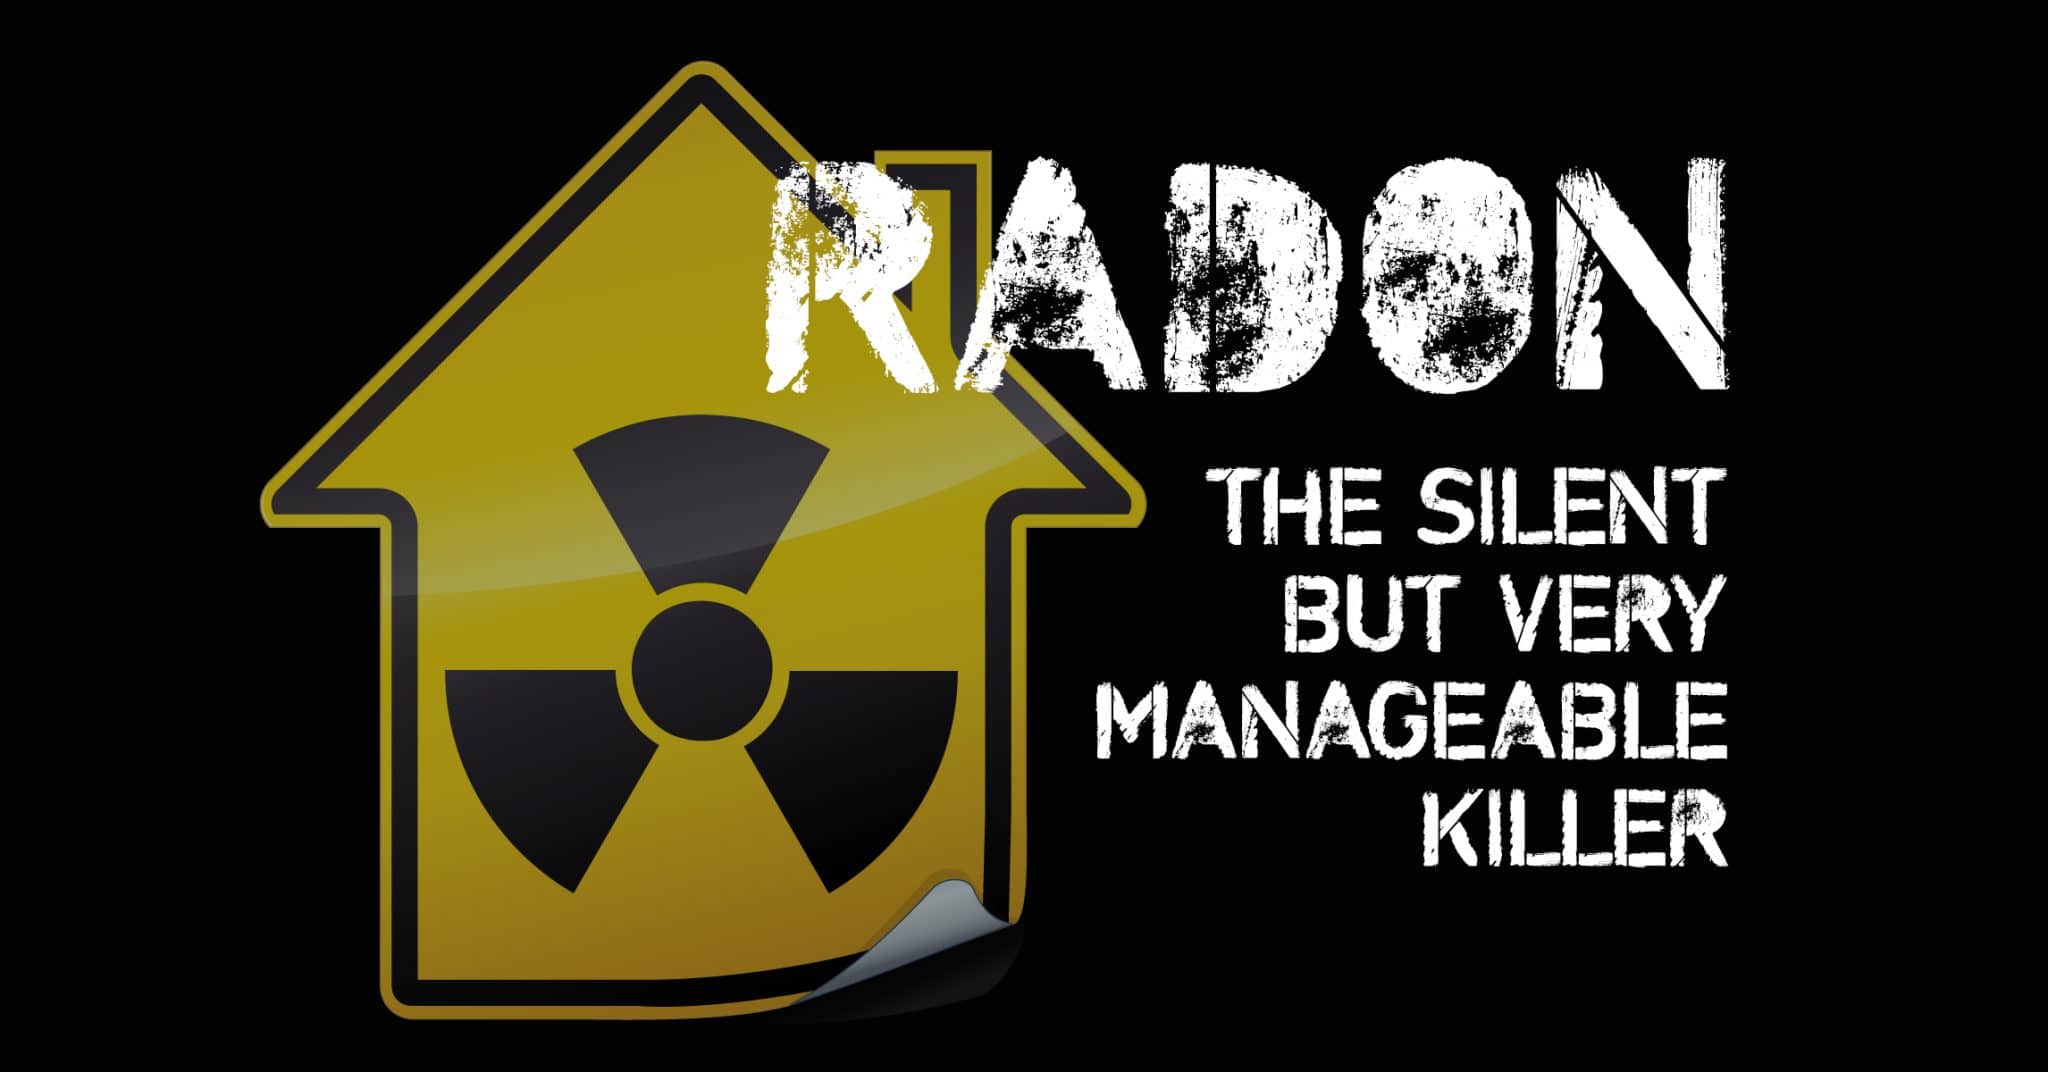 6 Things You Need to Know to Protect Your Family from Radon Gas2048 x 1072